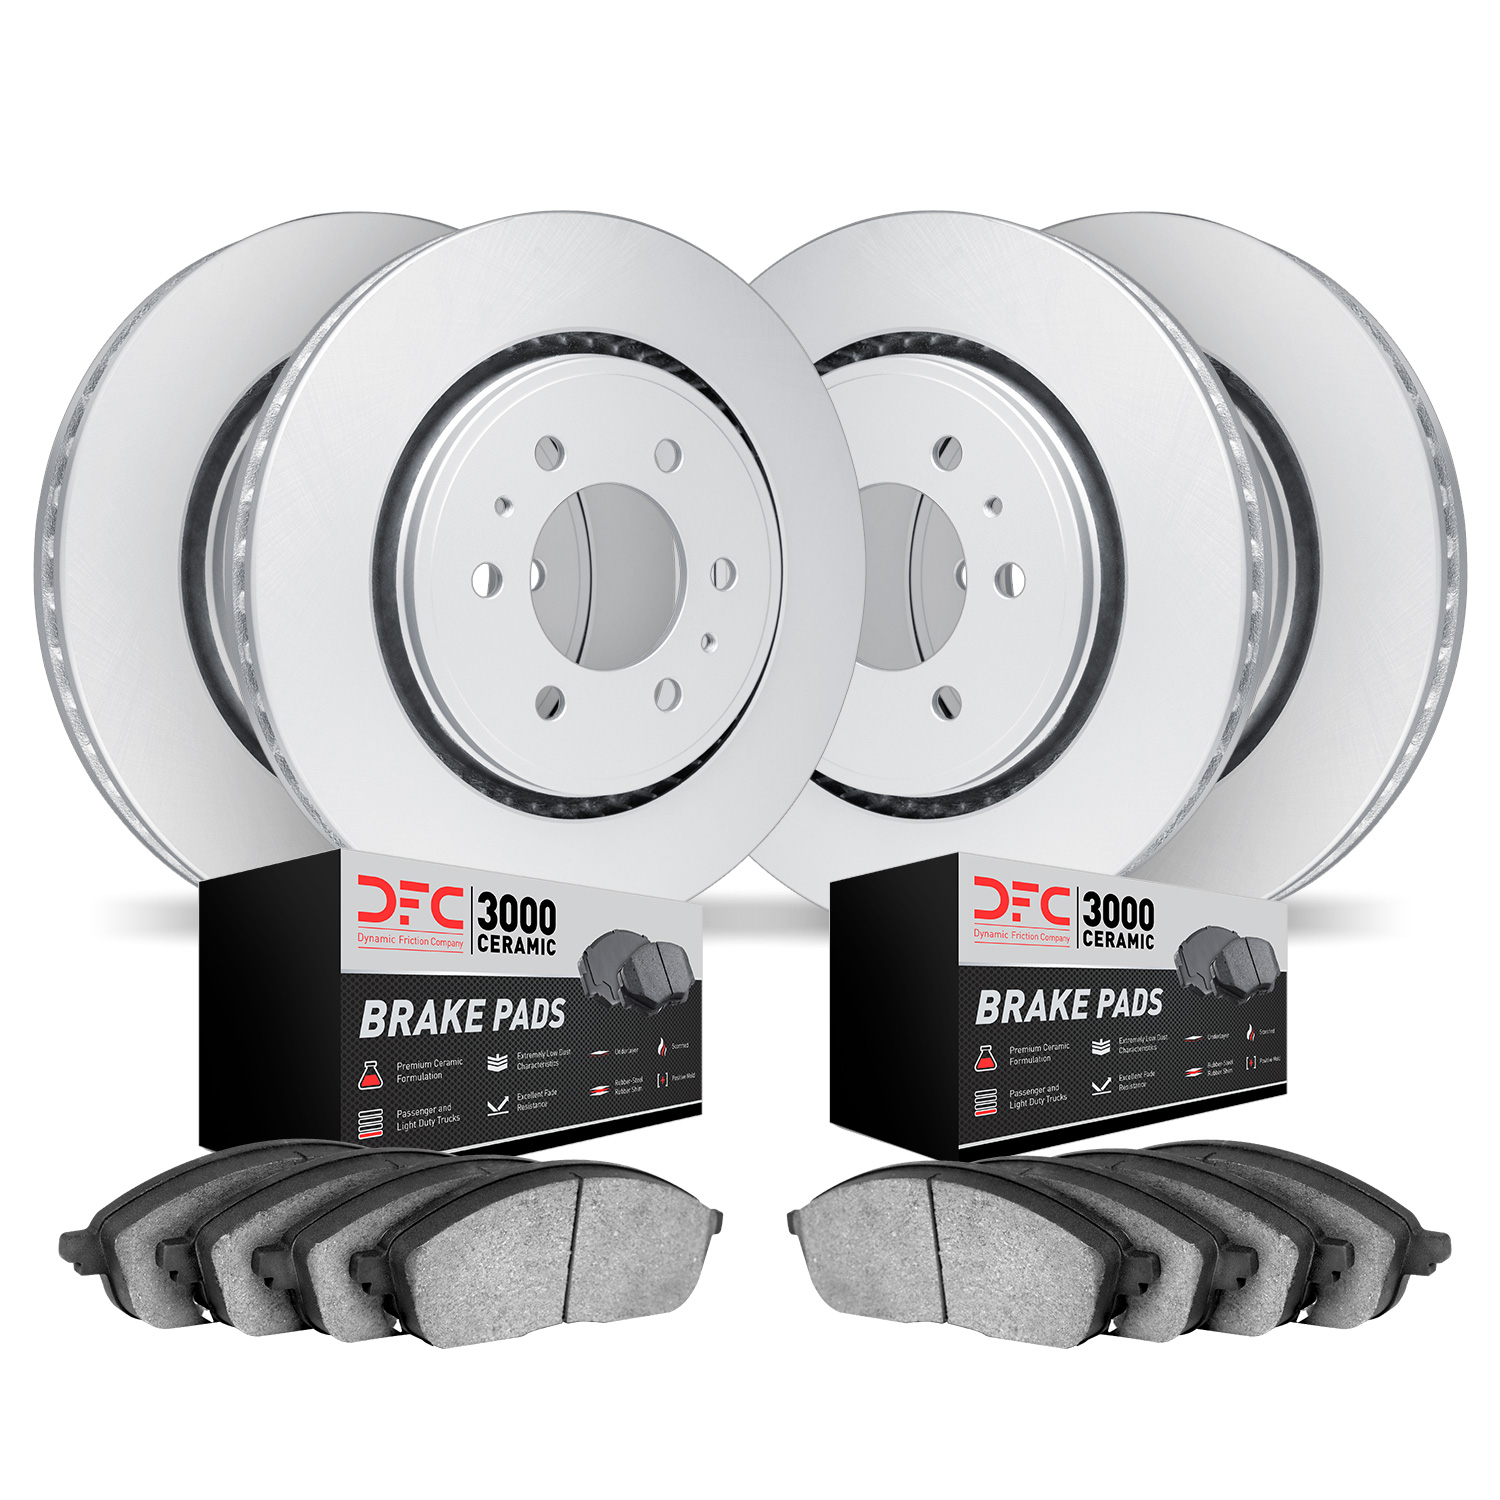 4304-68007 Geospec Brake Rotors with 3000-Series Ceramic Brake Pads Kit, Fits Select Infiniti/Nissan, Position: Front and Rear